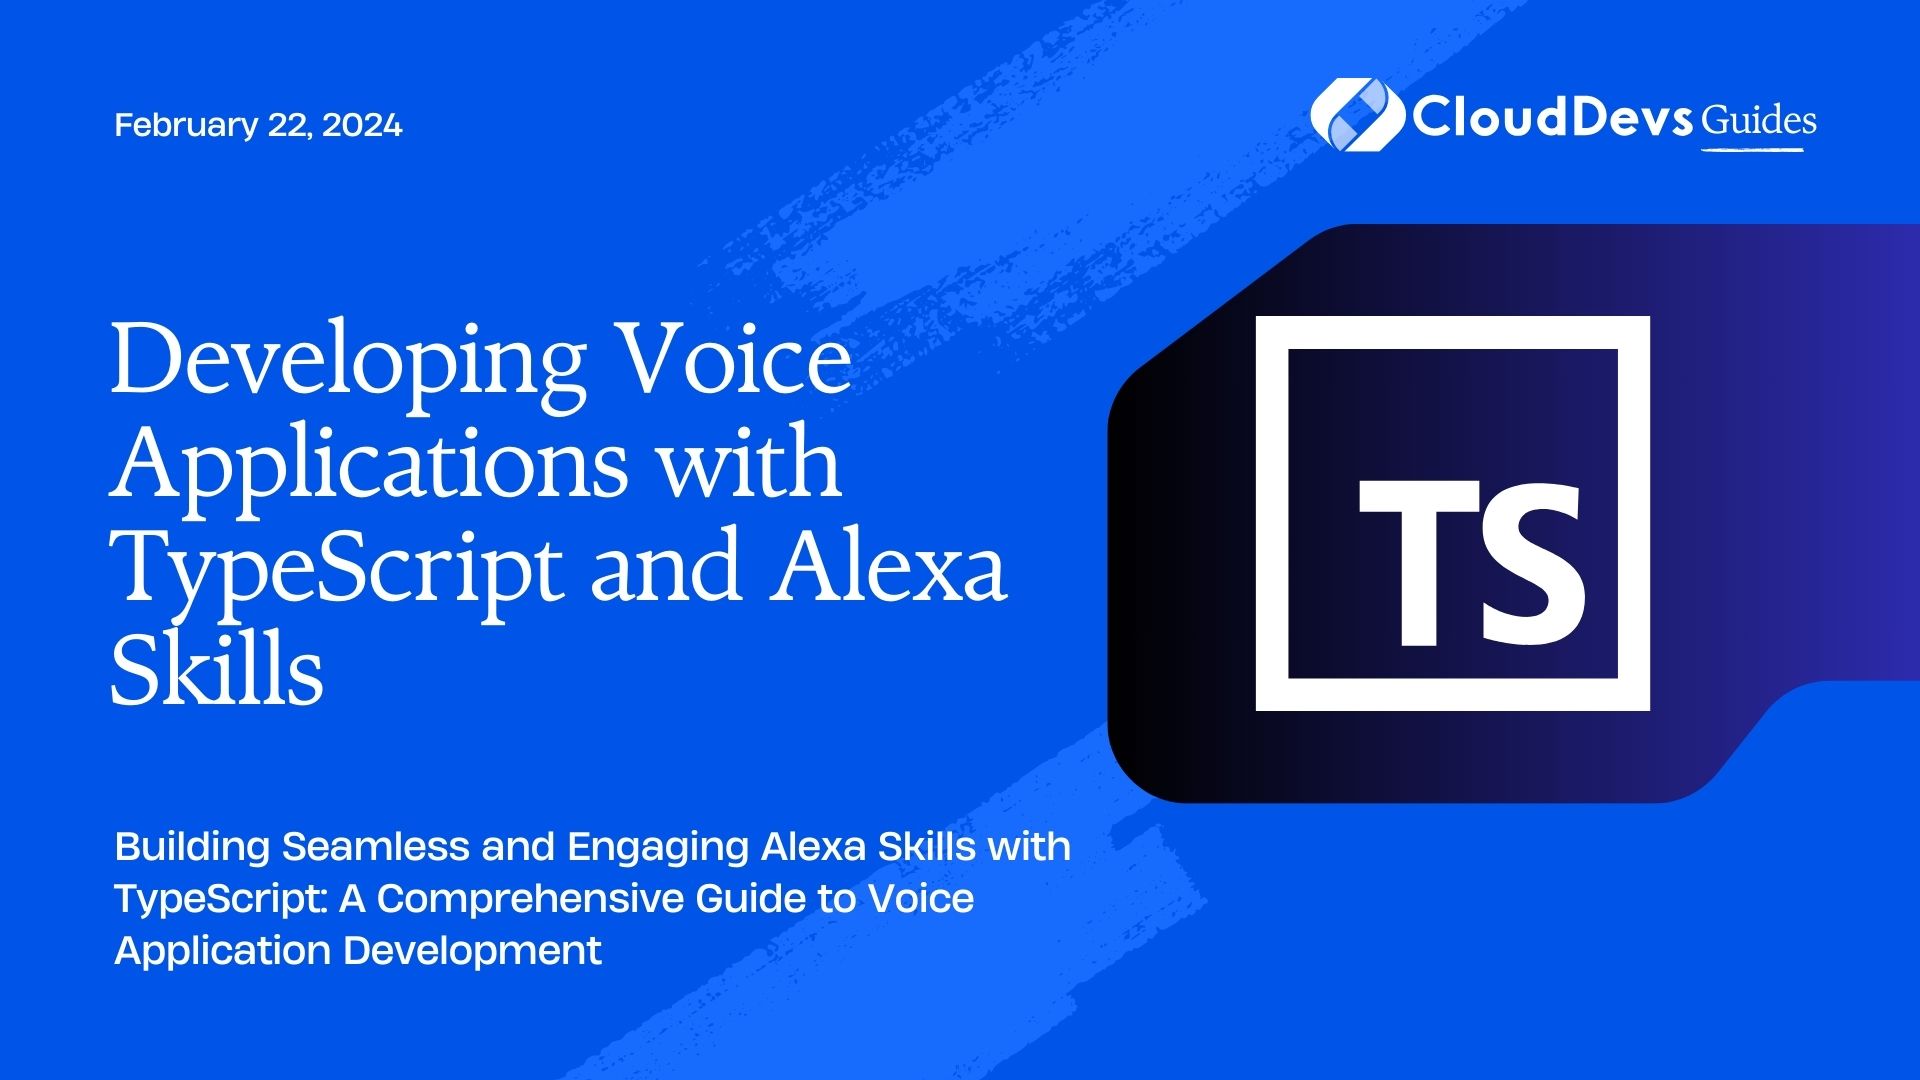 Developing Voice Applications with TypeScript and Alexa Skills